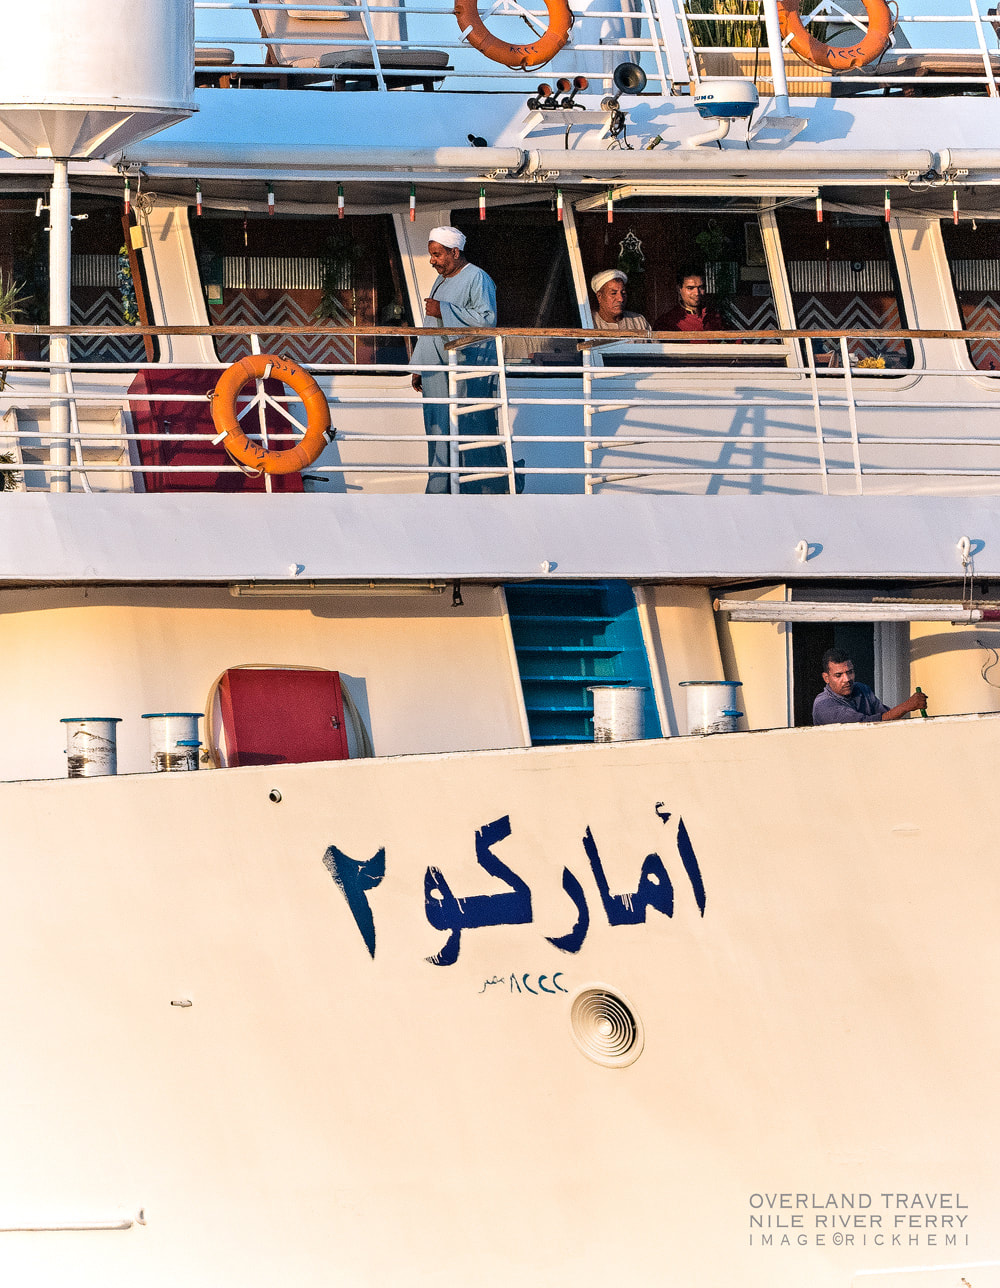 offshore solo overland travel, Nile ferry ferryboat, image by Rick Hemi